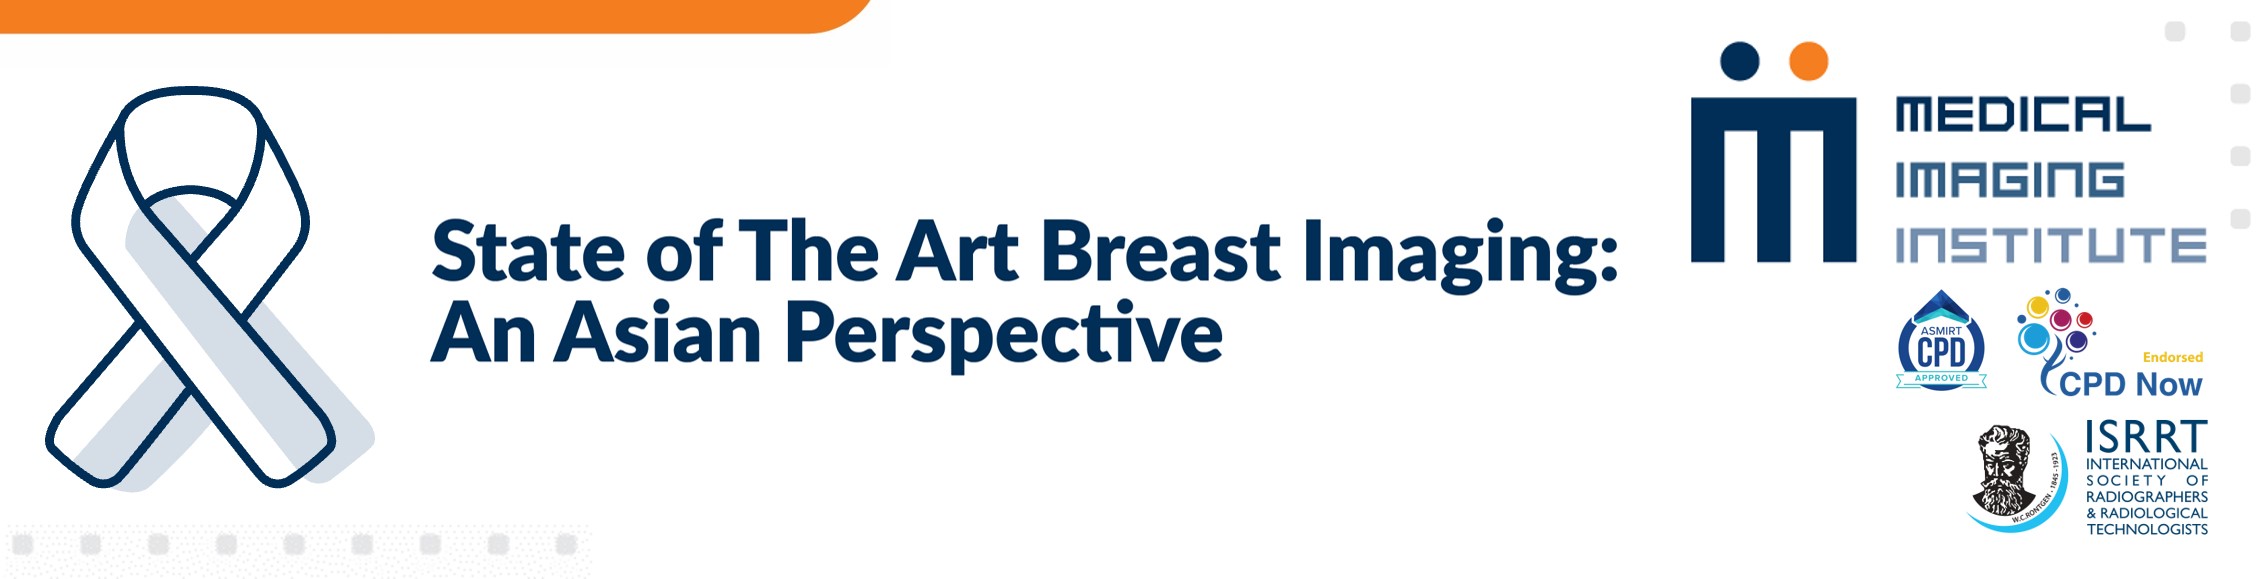 State of the Art Breast Imaging: An Asian Perspective